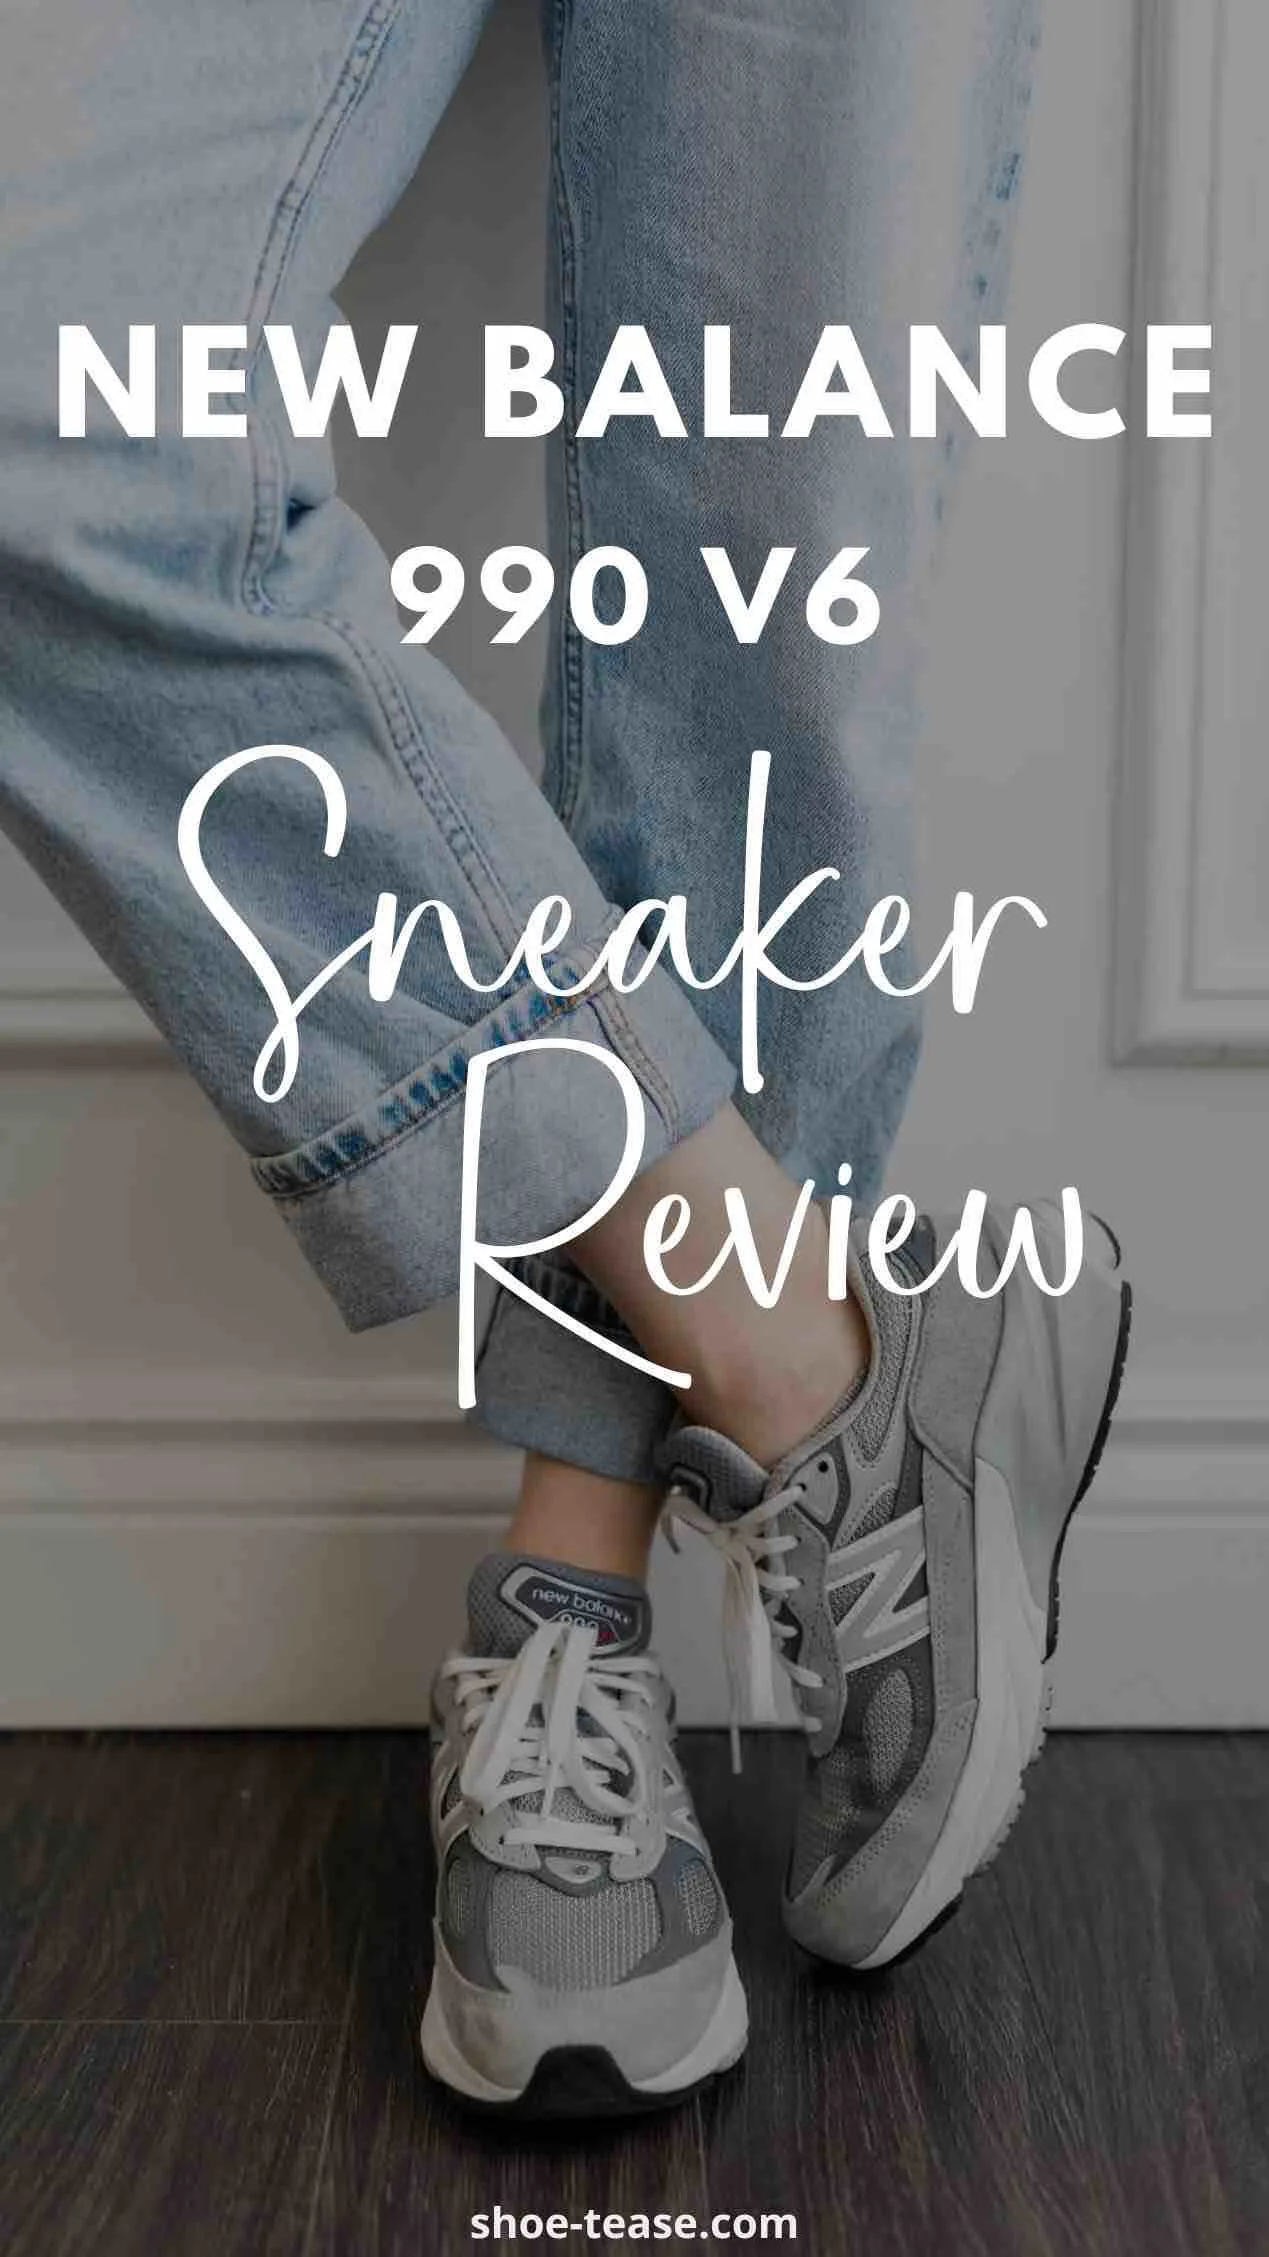 Darkened close up of woman's legs wearing grey dad sneakers with rolled up faded straight leg jeans under text reading new balance 990 V6 sneakers review.